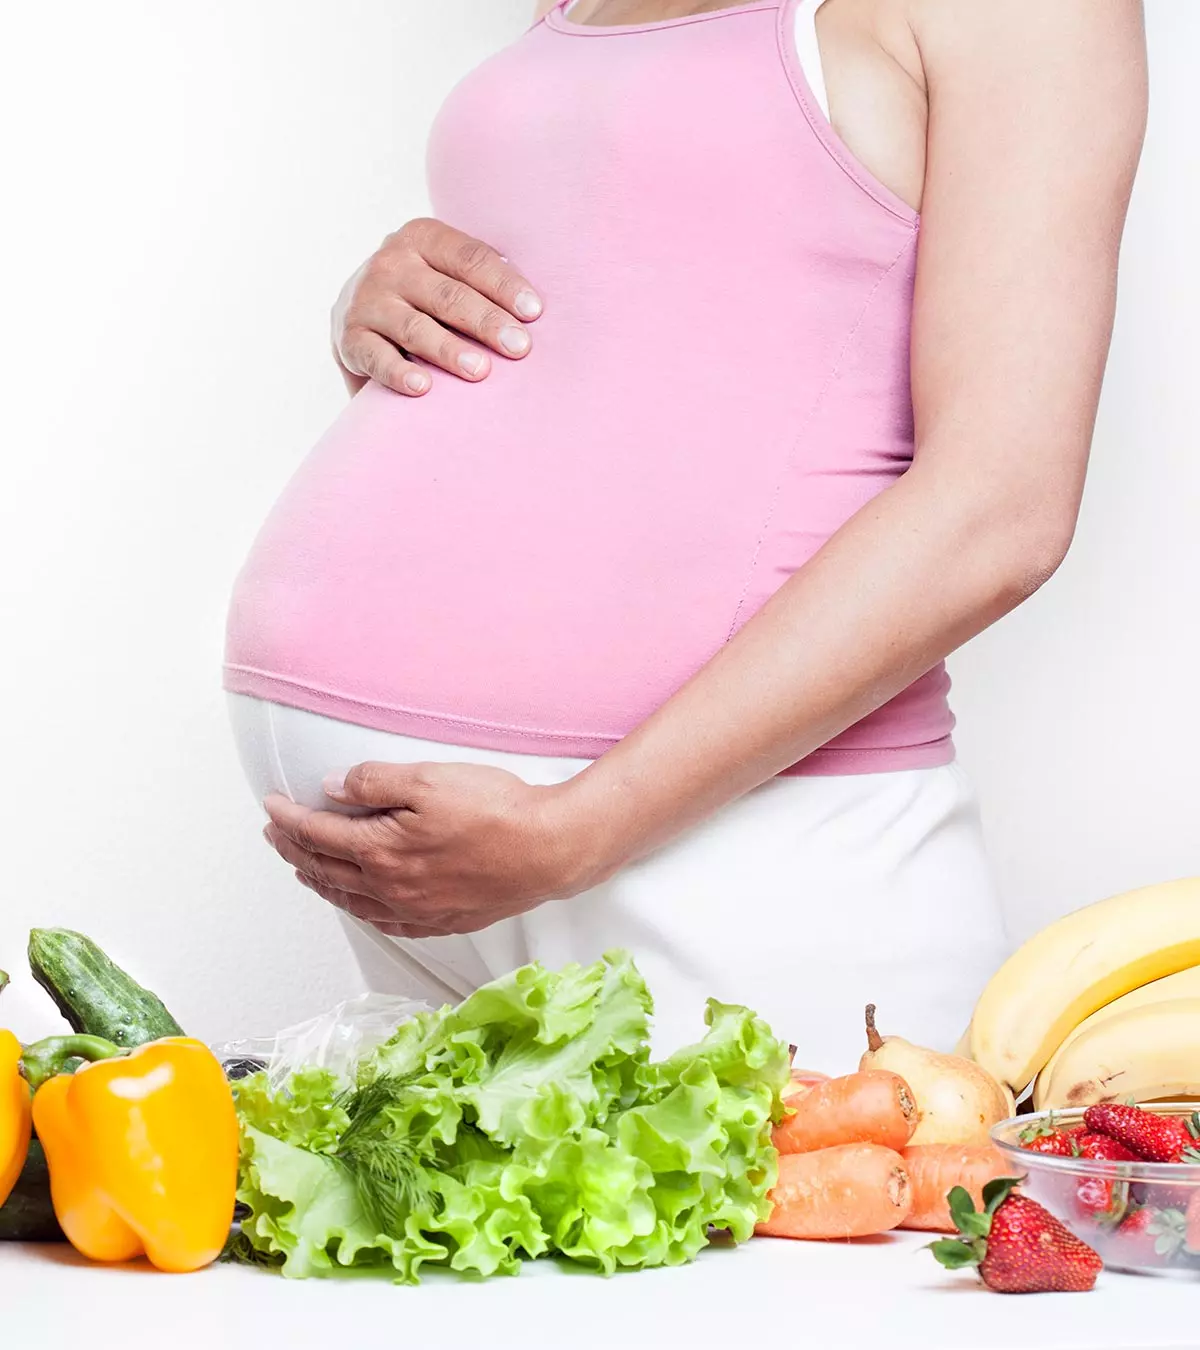 Is It Safe To Detox During Pregnancy